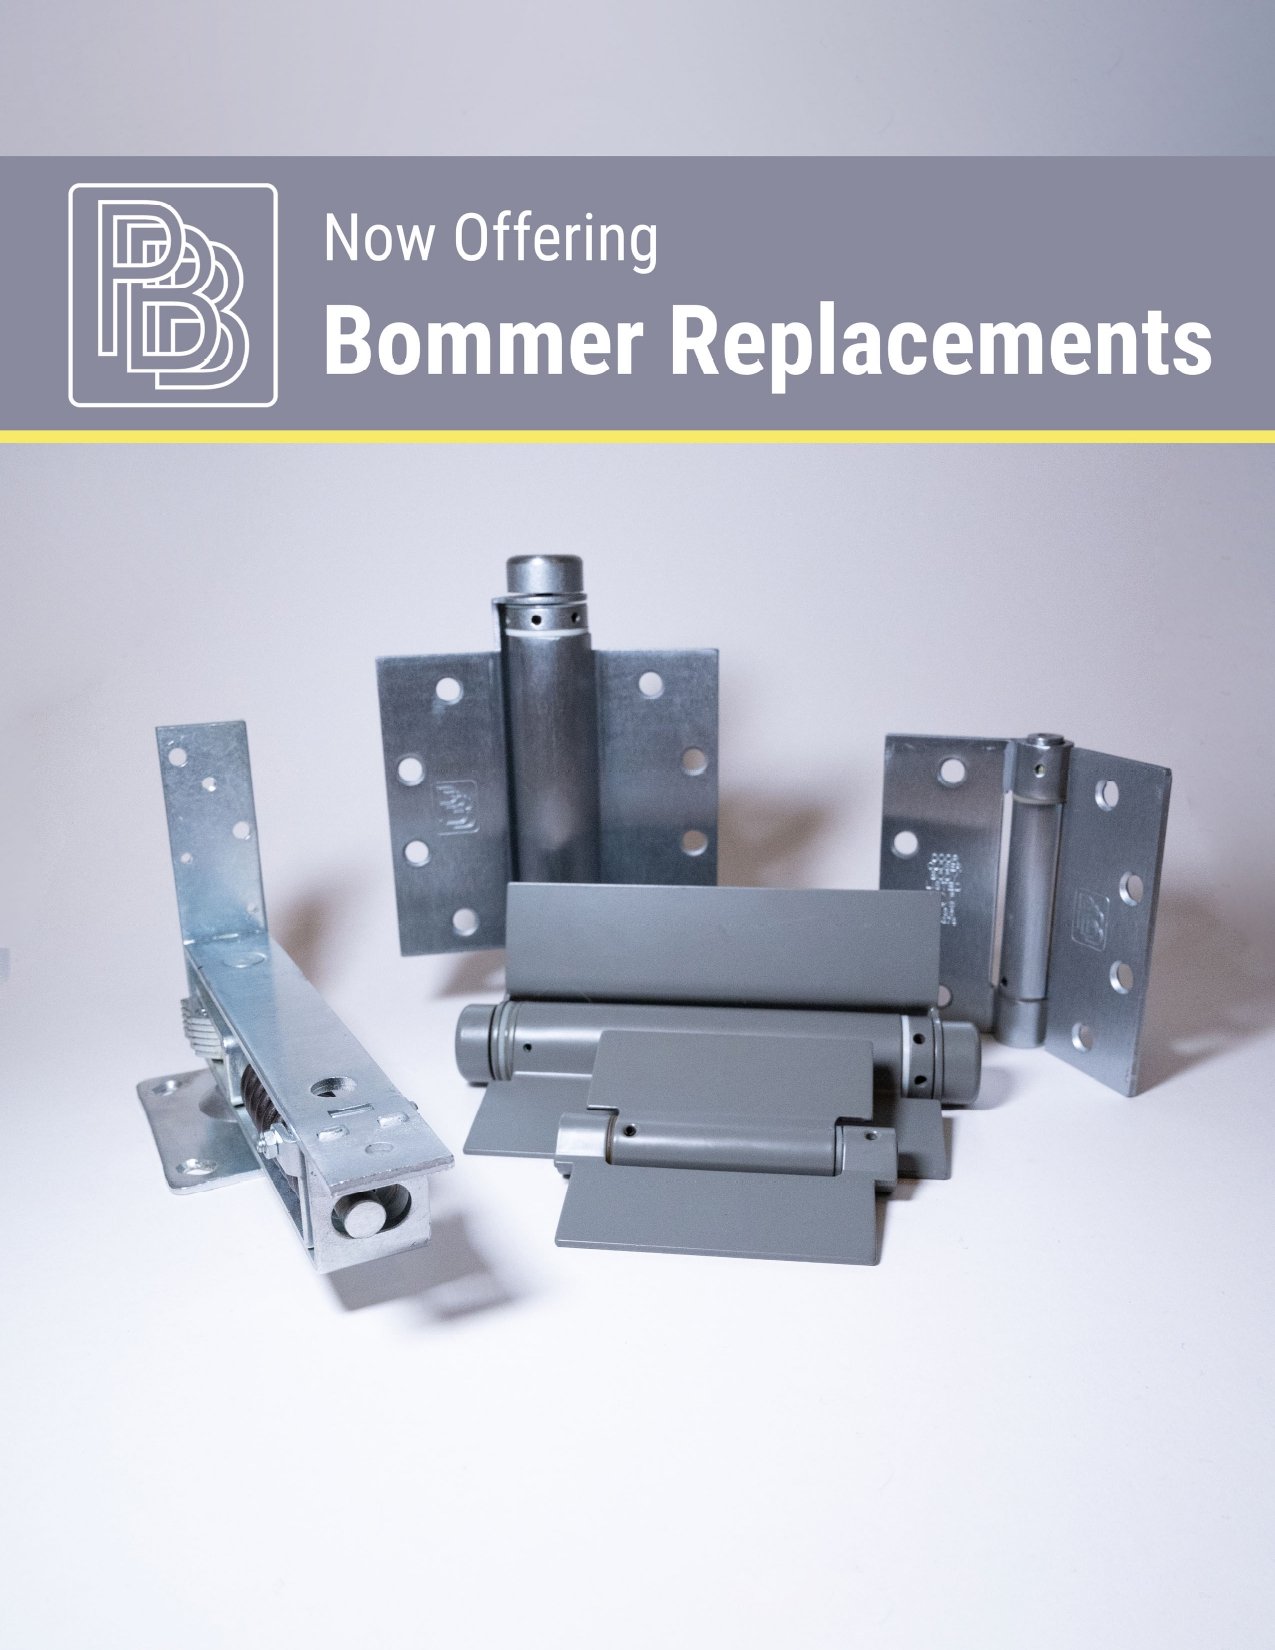 Bommer Replacements (PDF)